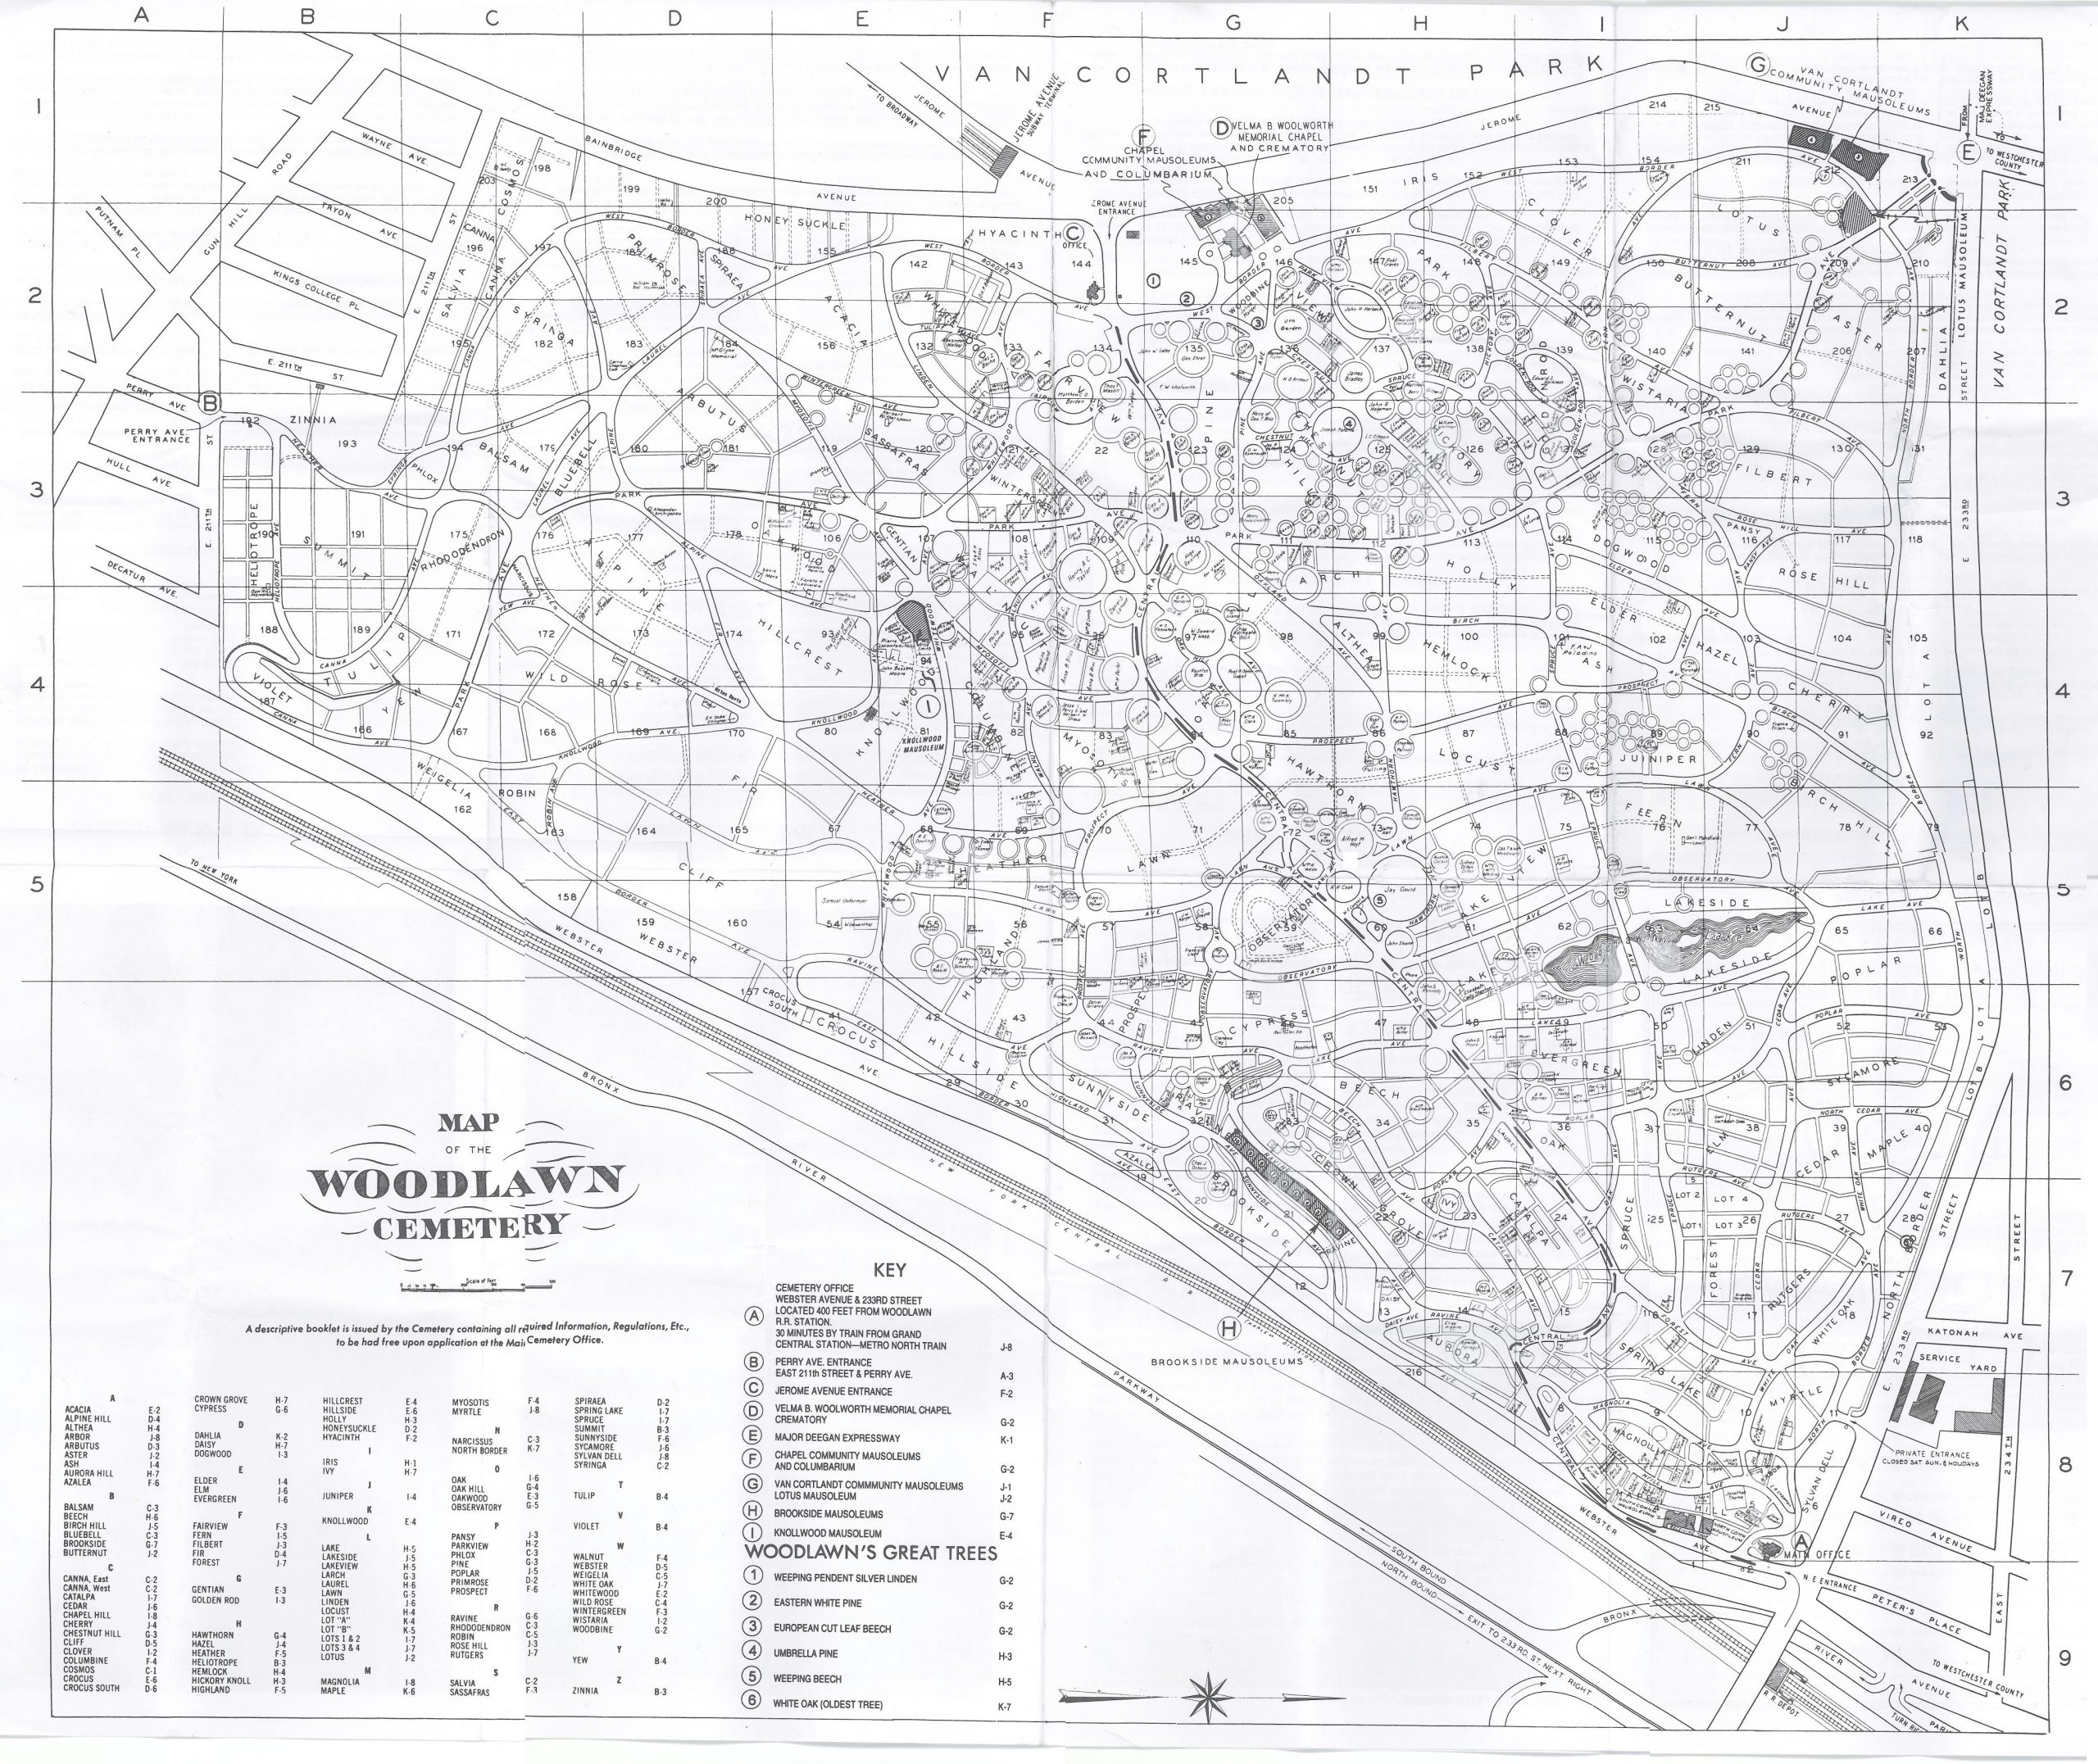 Cemetery Map of Woodlawn Cemetery, Bronx NYC